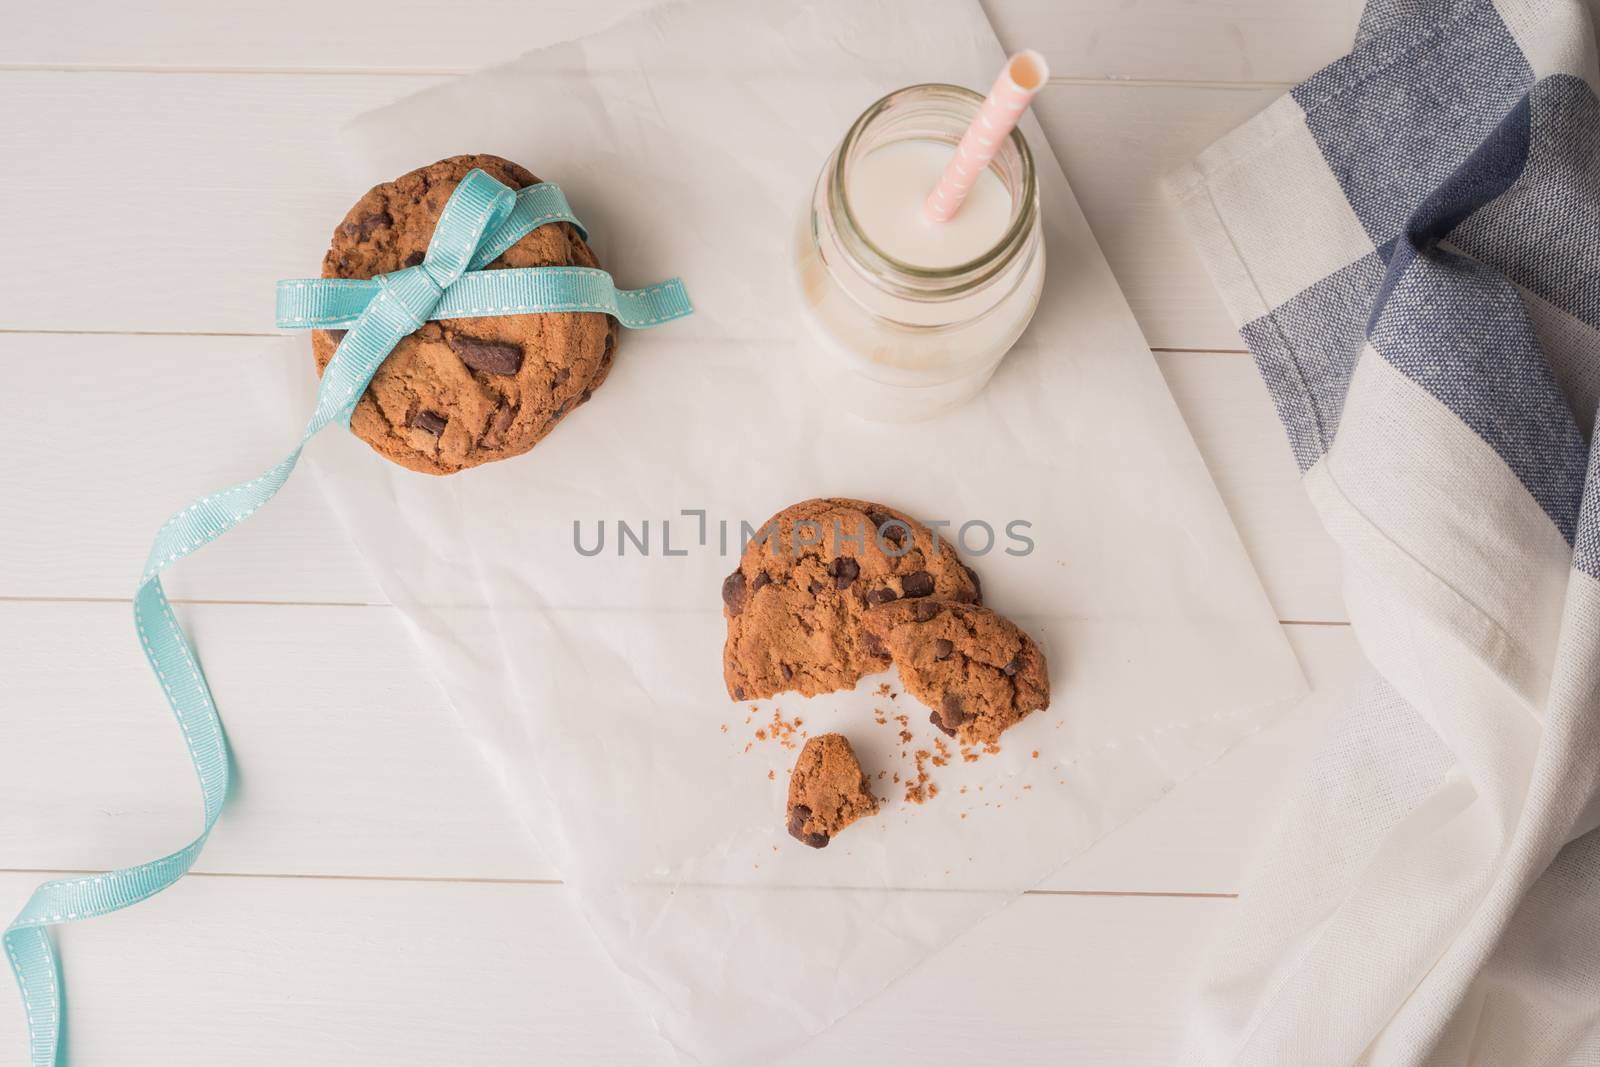 Chocolate chip cookies with a blue ribbon and a glass of milk with a straw on a white wooden table background. Vintage look.